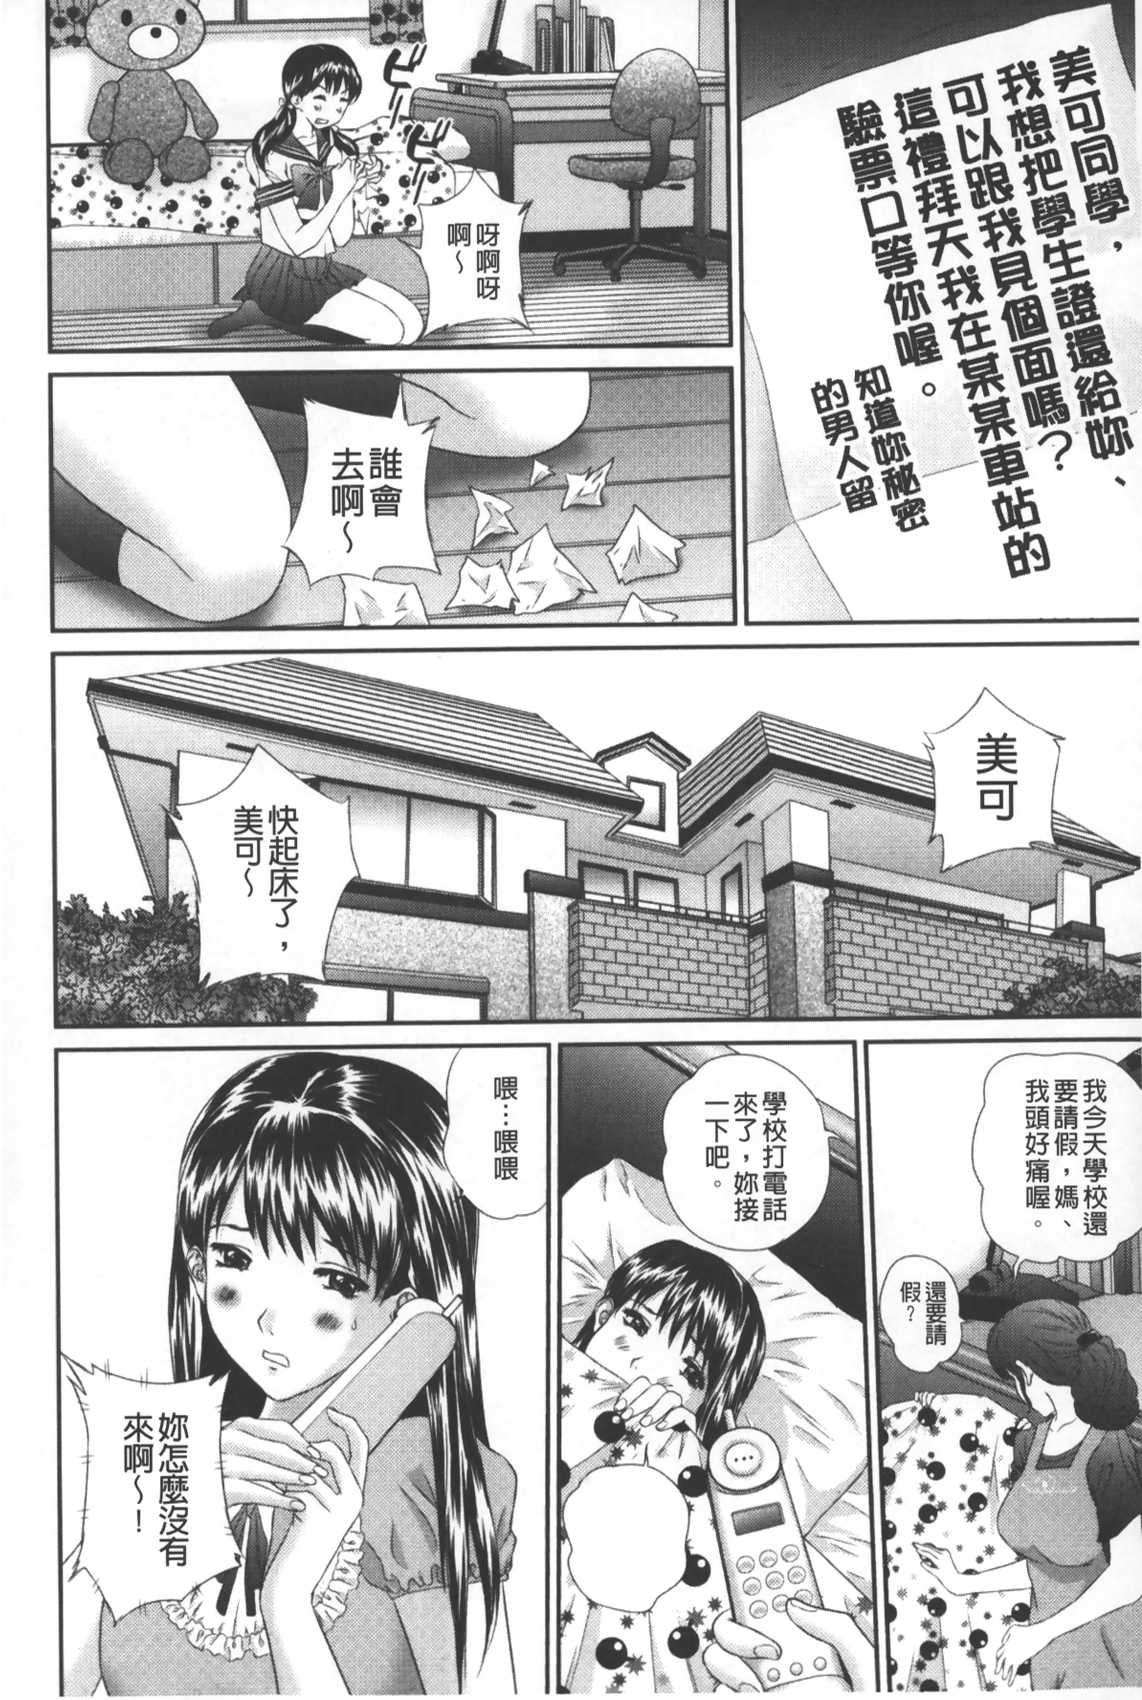 [Manzou] Tousatsu Collector | 盜拍題材精選集 [Chinese] page 7 full